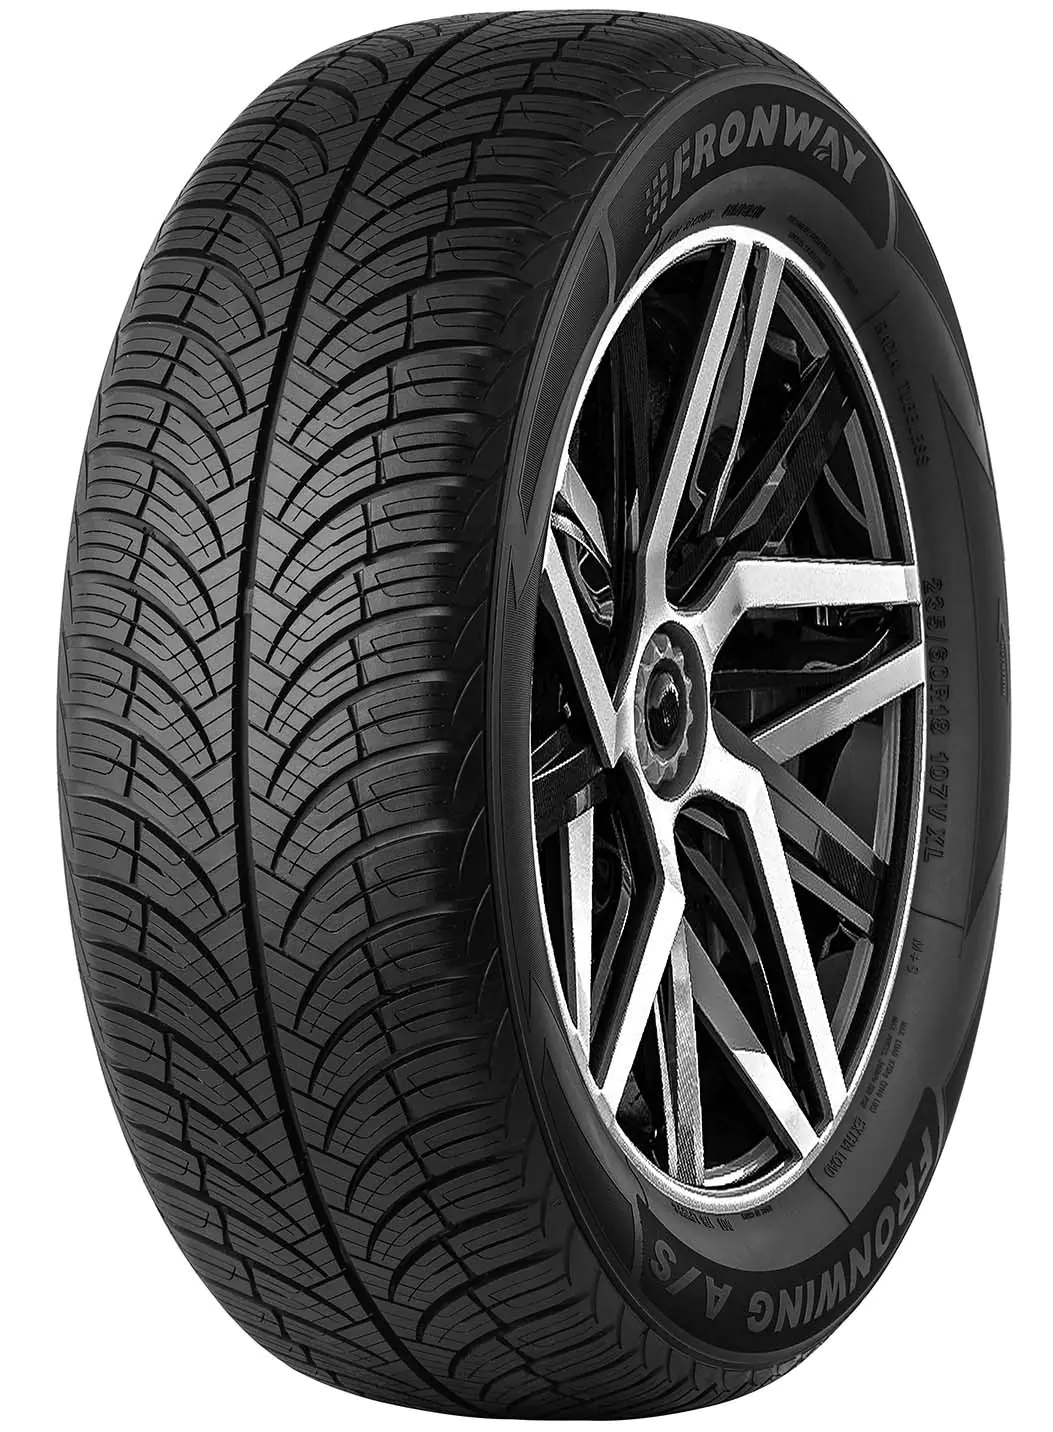 Fronway Fronway 195/70 R14 91H FRONWING A/S pneumatici nuovi All Season 